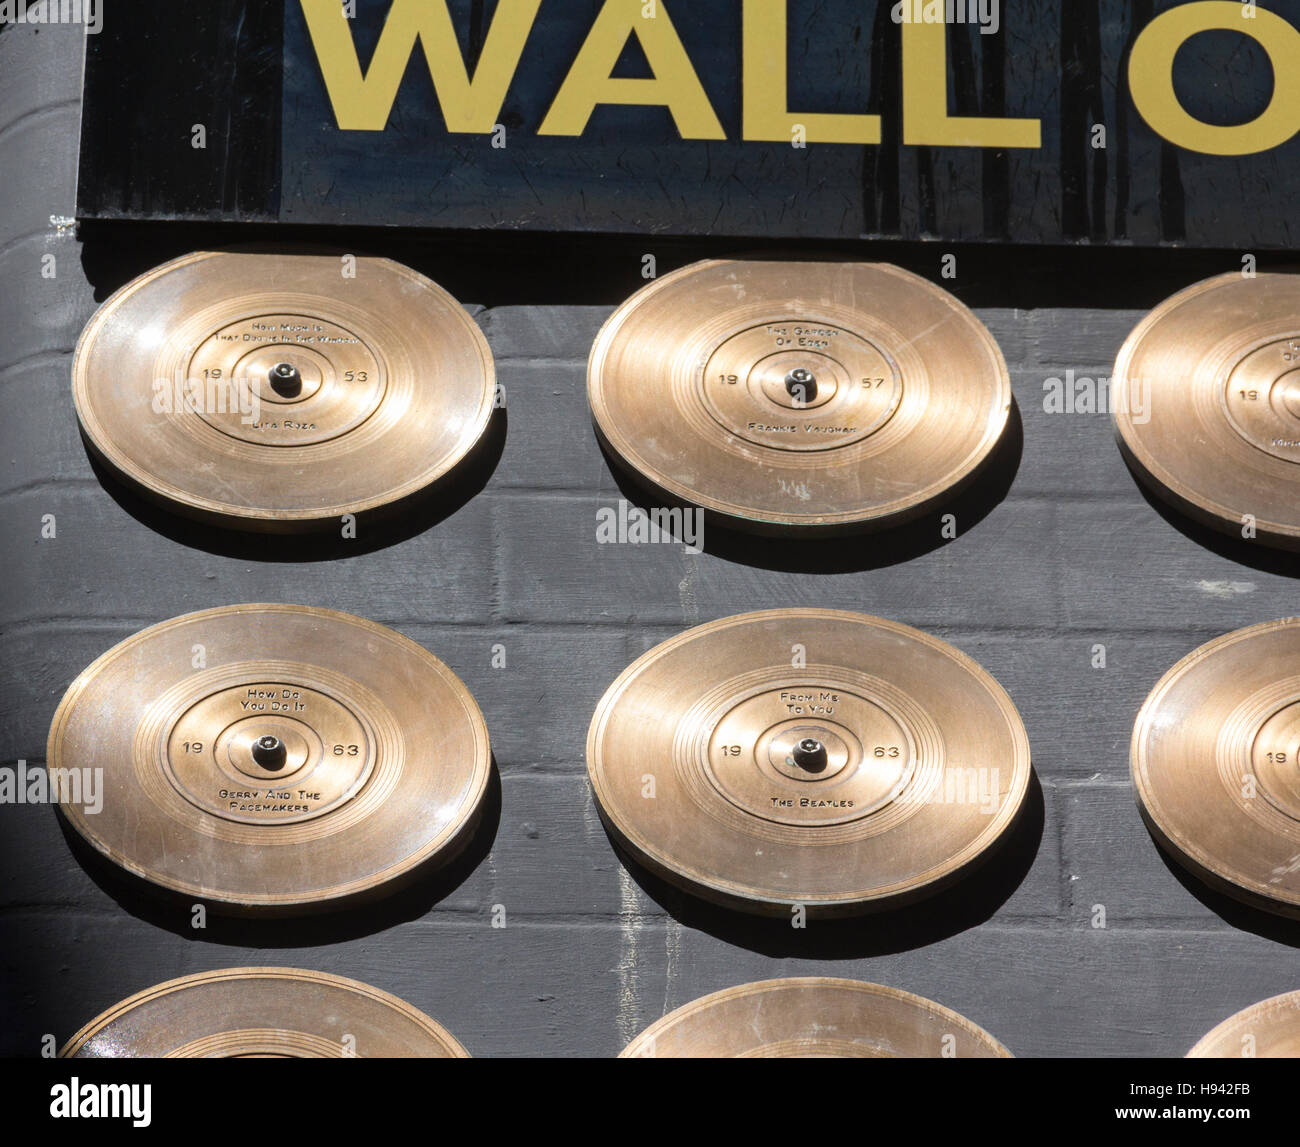 Small section of the Liverpool wall of fame, Mathew Street, bronze discs commemorating number one records by Liverpool artists. Stock Photo